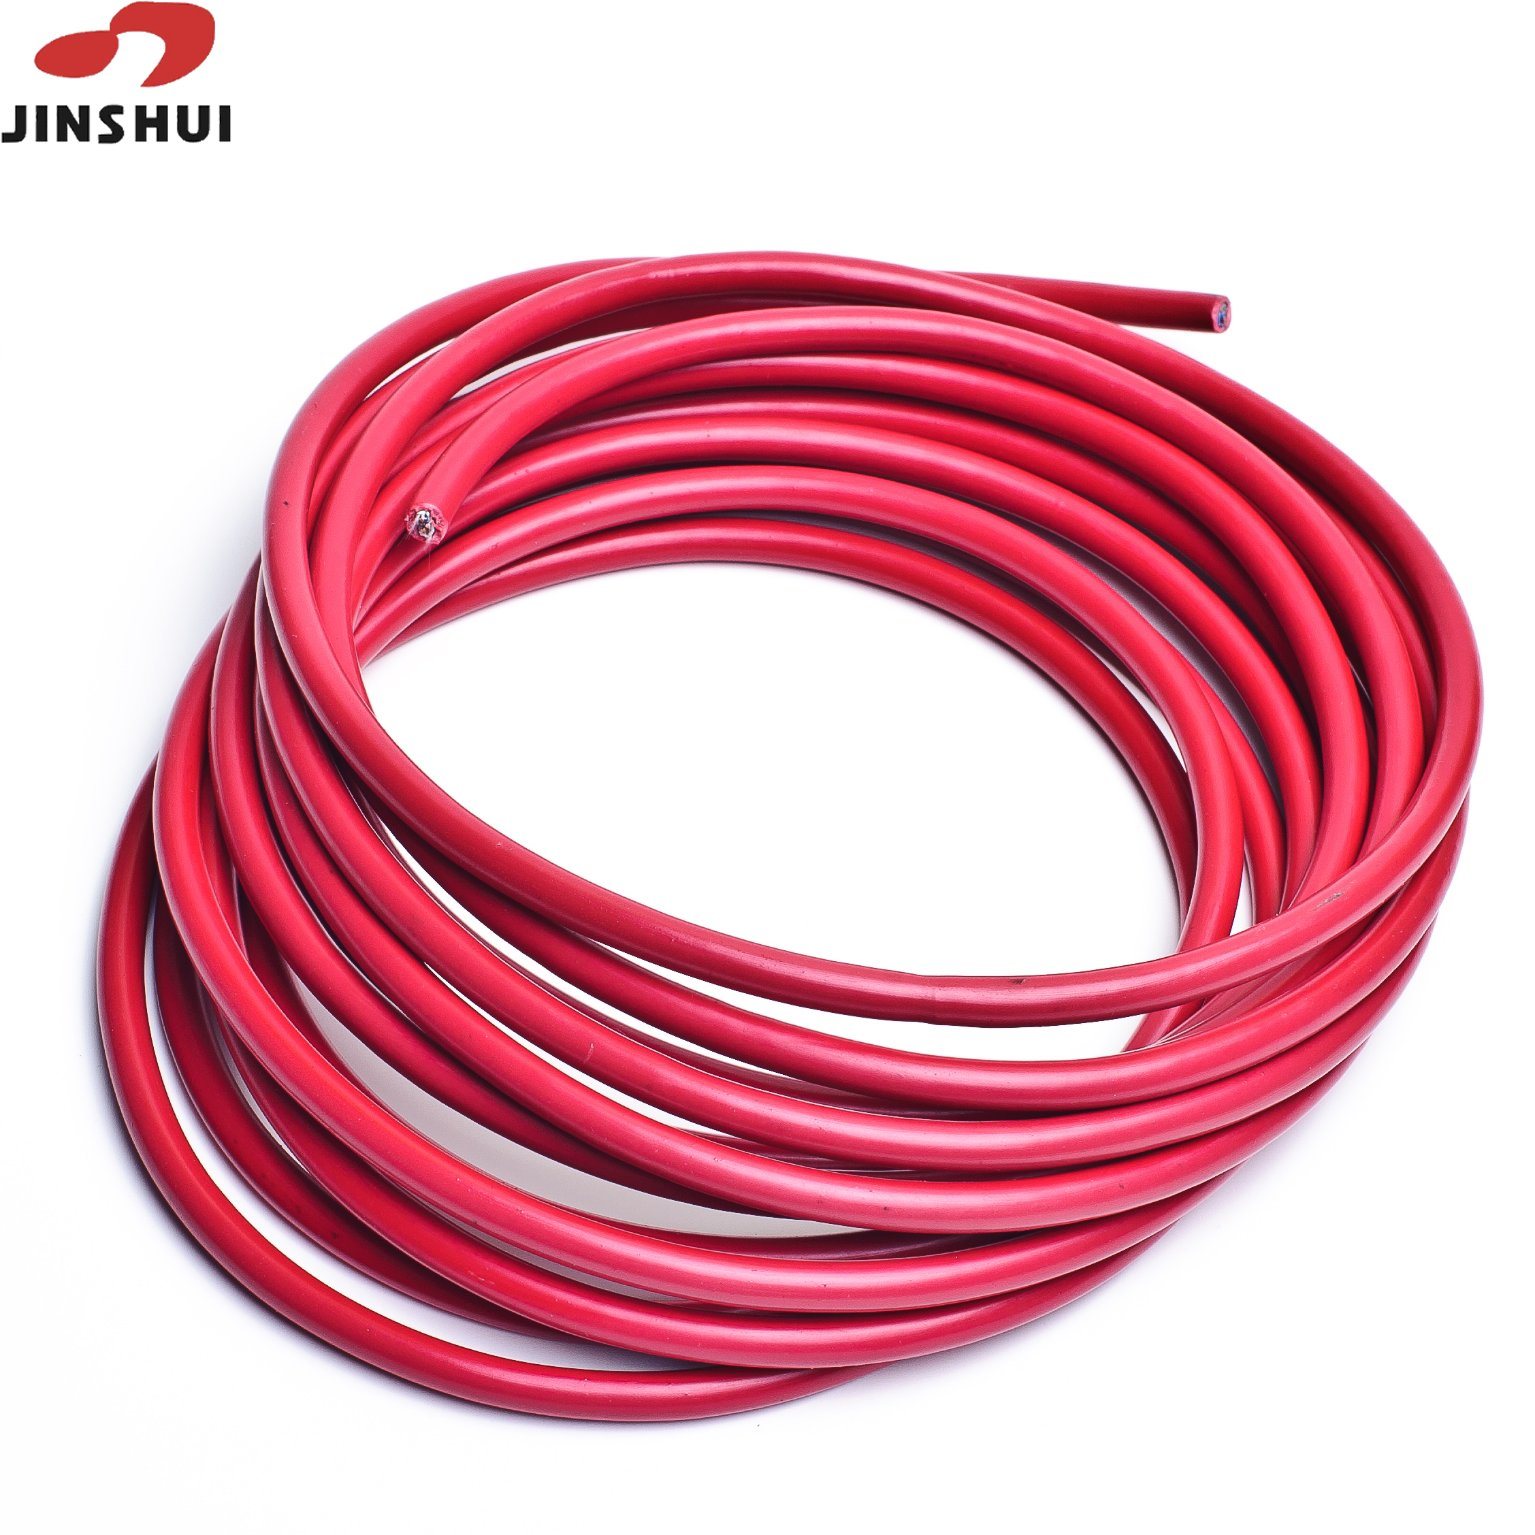 450/750V BV Bvr 2.5mm 3mm PVC Insulated General Internal Purpose Electric Wire for Electronic Equipment Electric Wire Cable